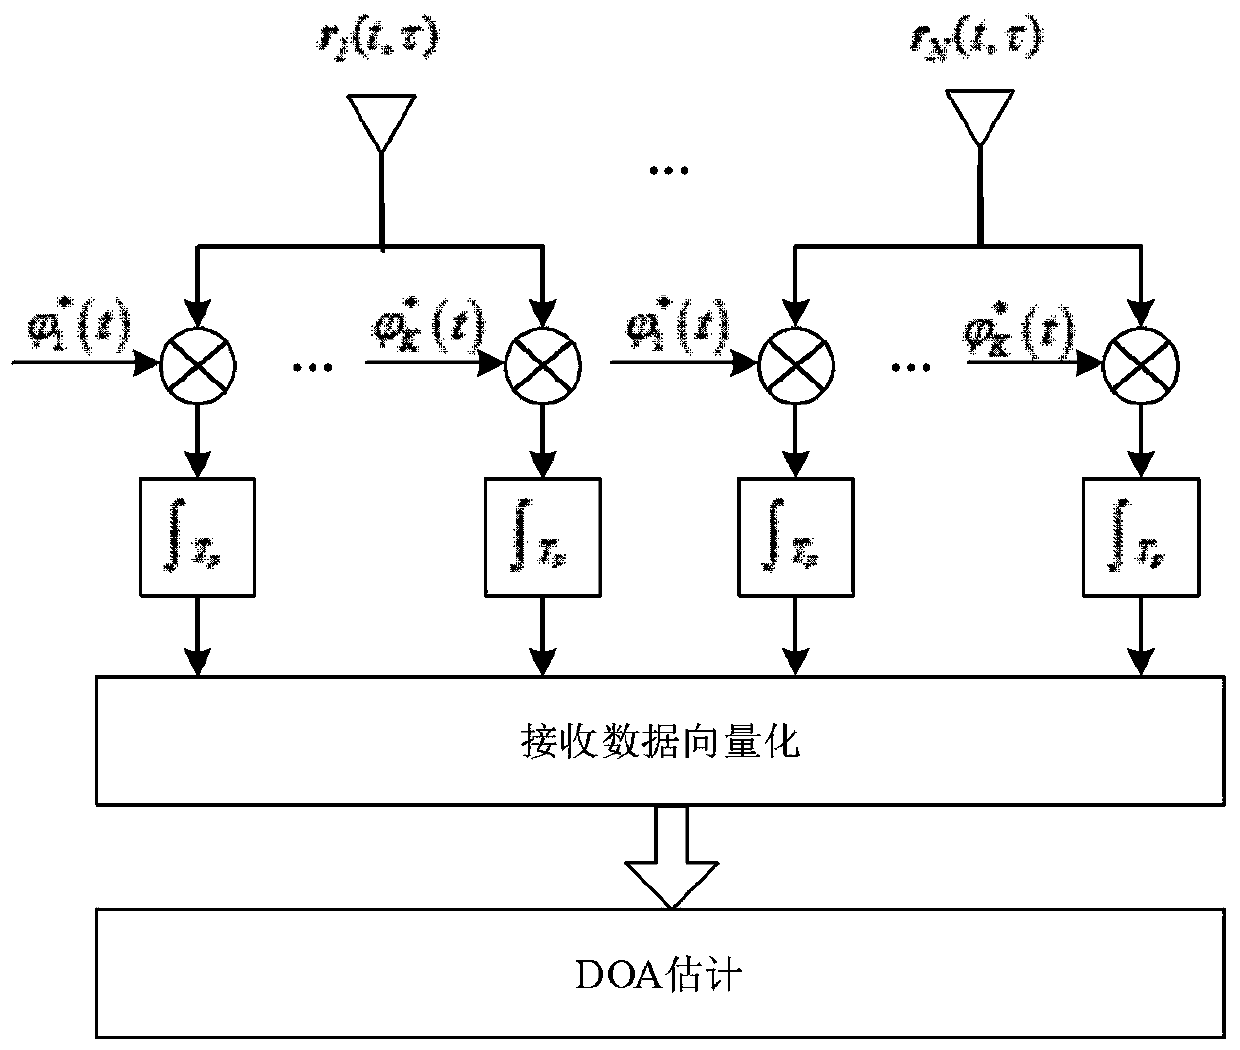 A Low Sidelobe Transmit Pattern Design Method for Improving the DoA Estimation Performance of MIMO Radar